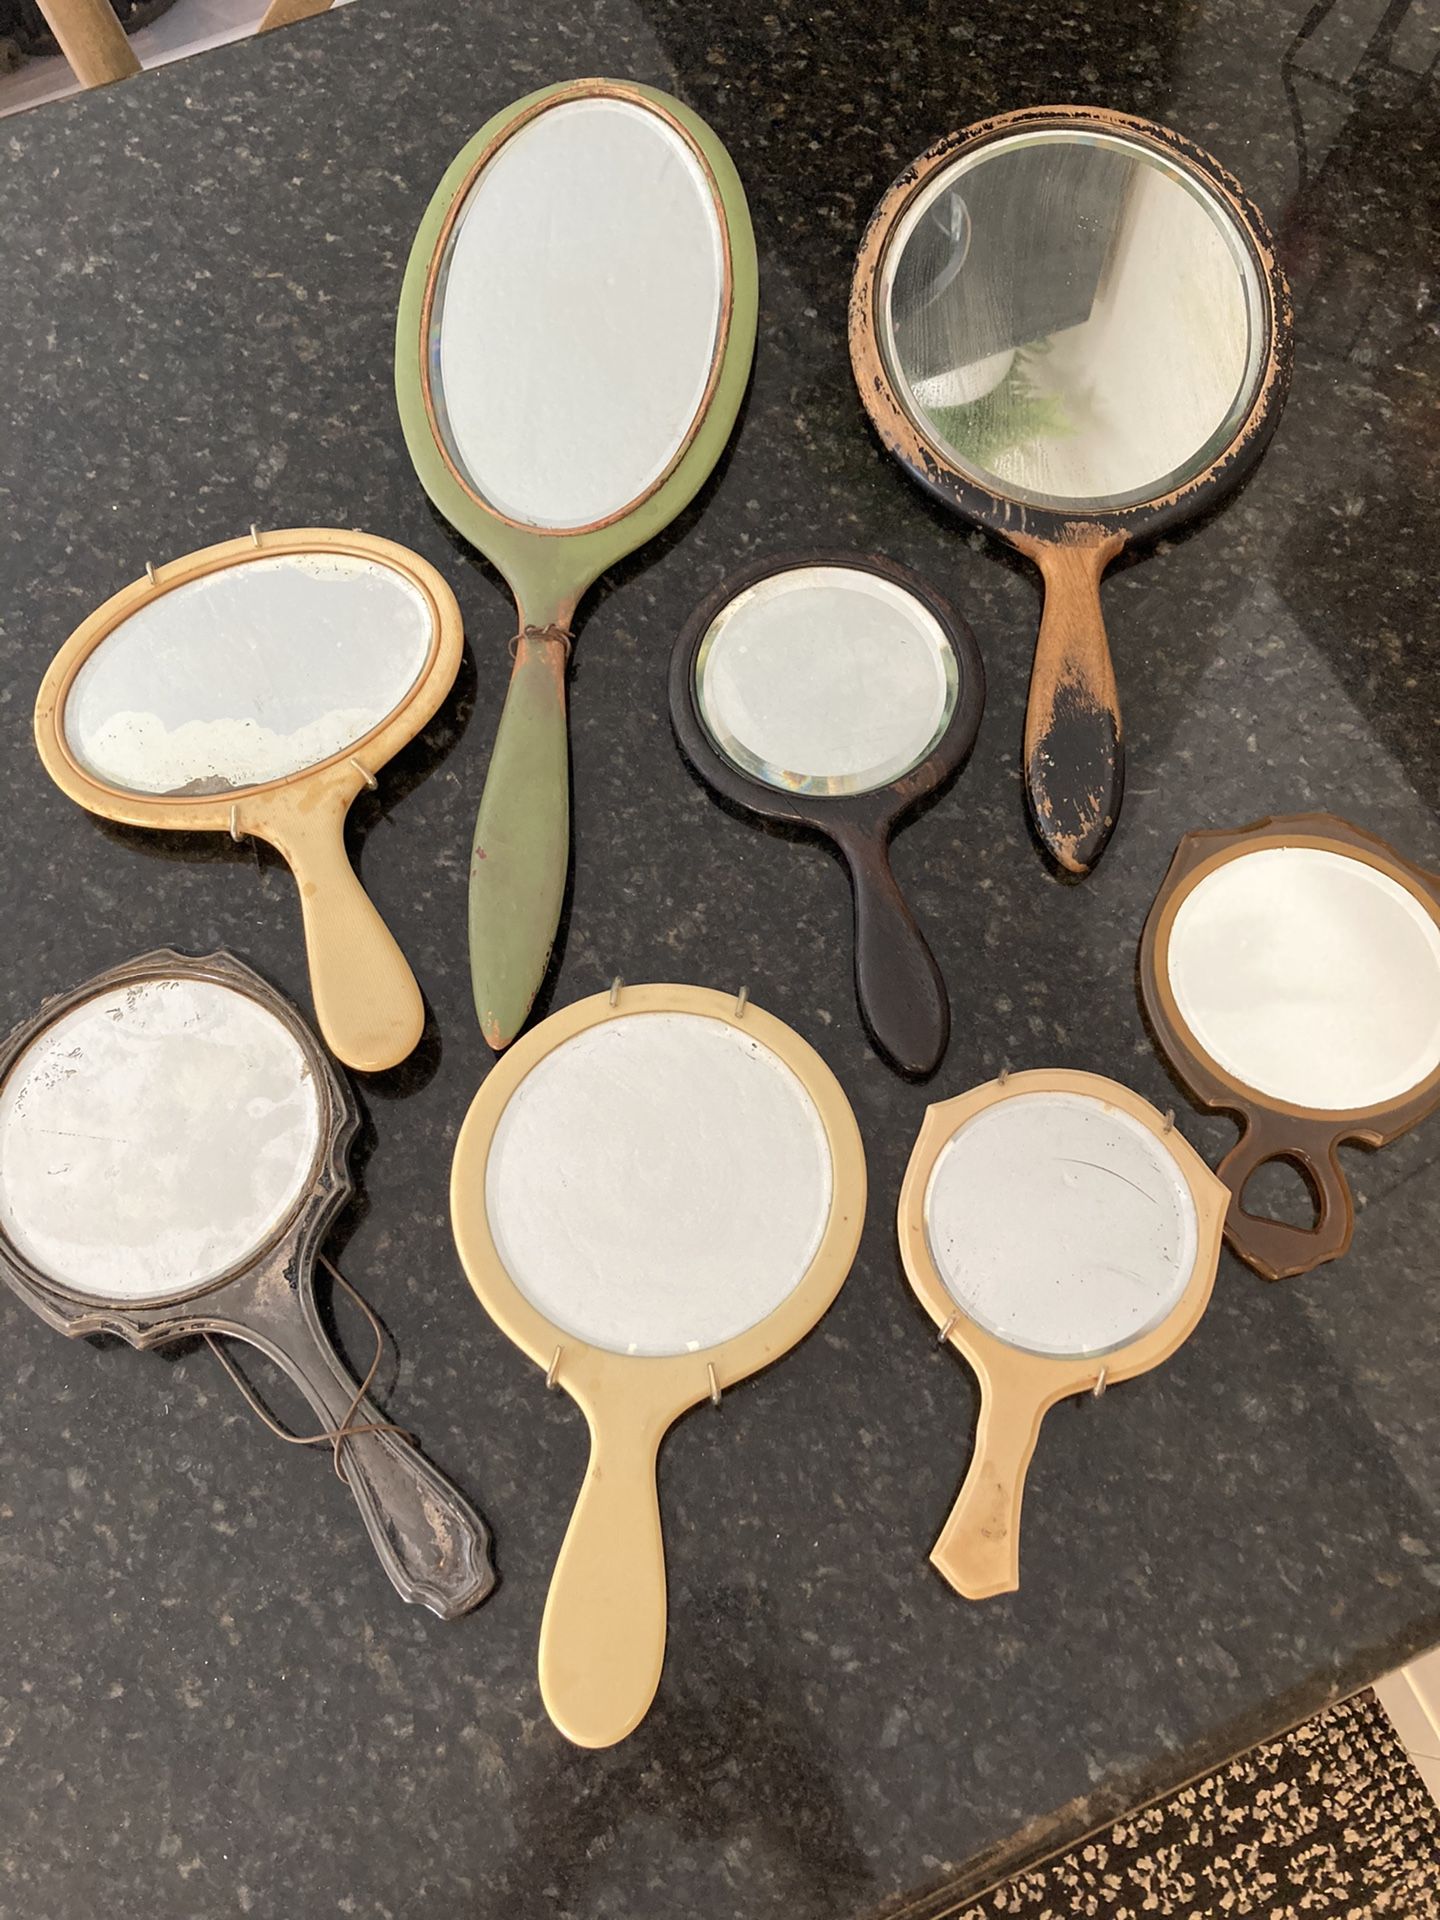 $12 ea. Giant lot of vintage & Antique hand mirrors (see other listing for lot of vintage wall mirrors)